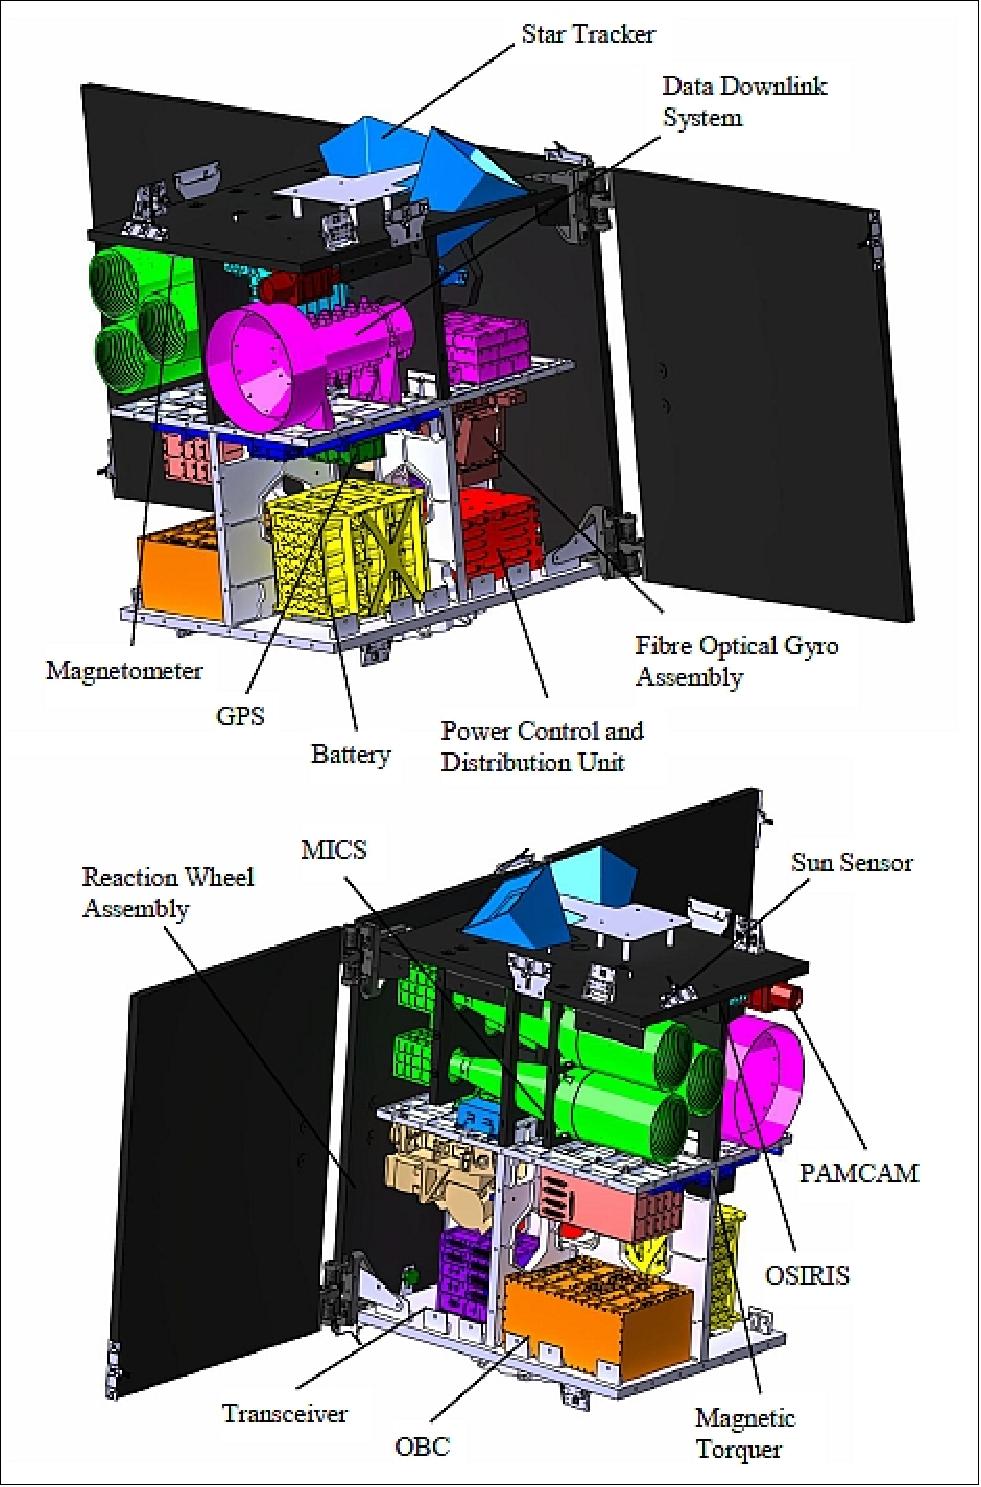 Figure 2: Two views of the Flying Laptop satellite configuration (image credit: IRS Stuttgart)